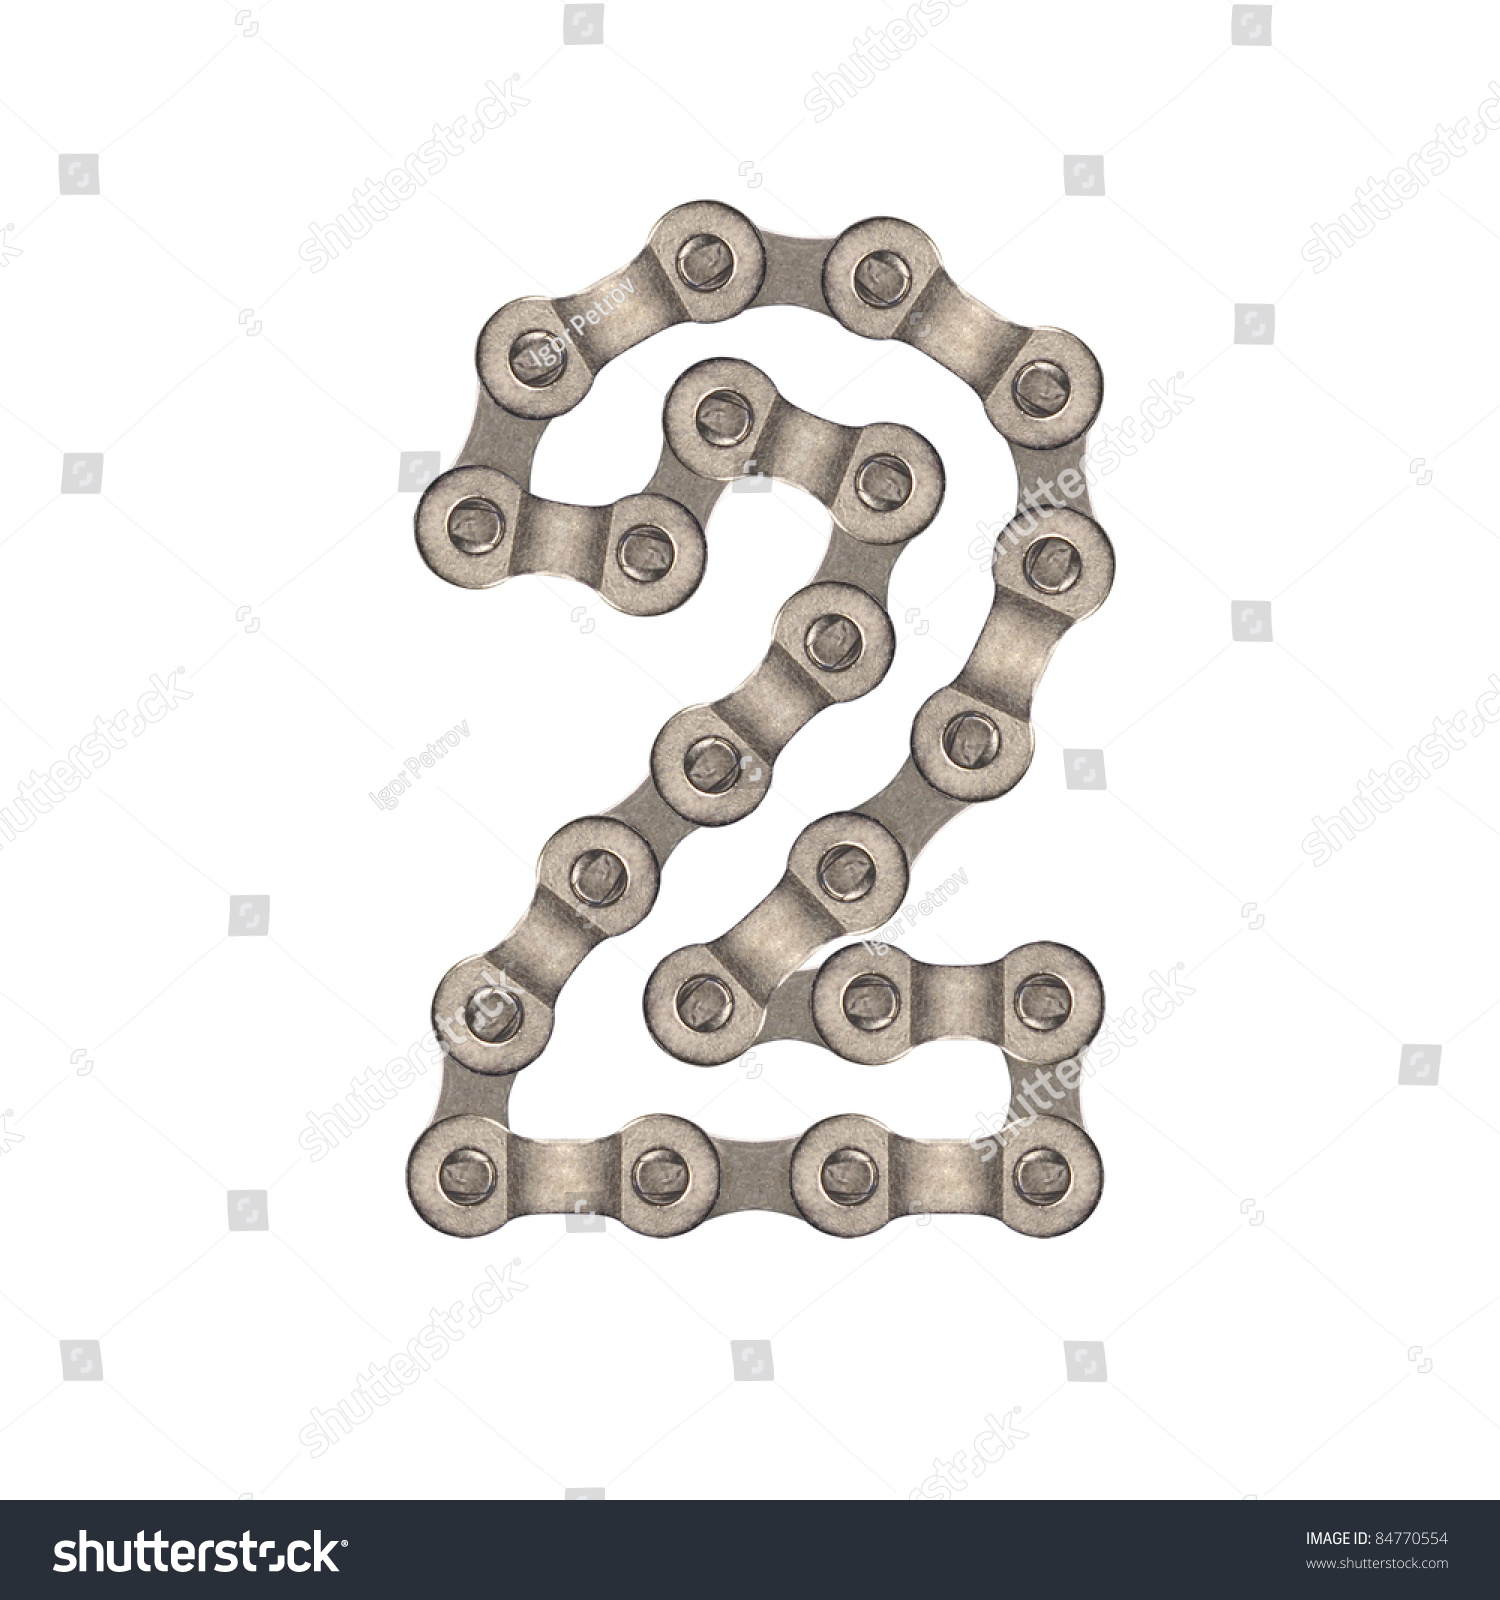 numbers-of-chain-stock-photo-84770554-shutterstock